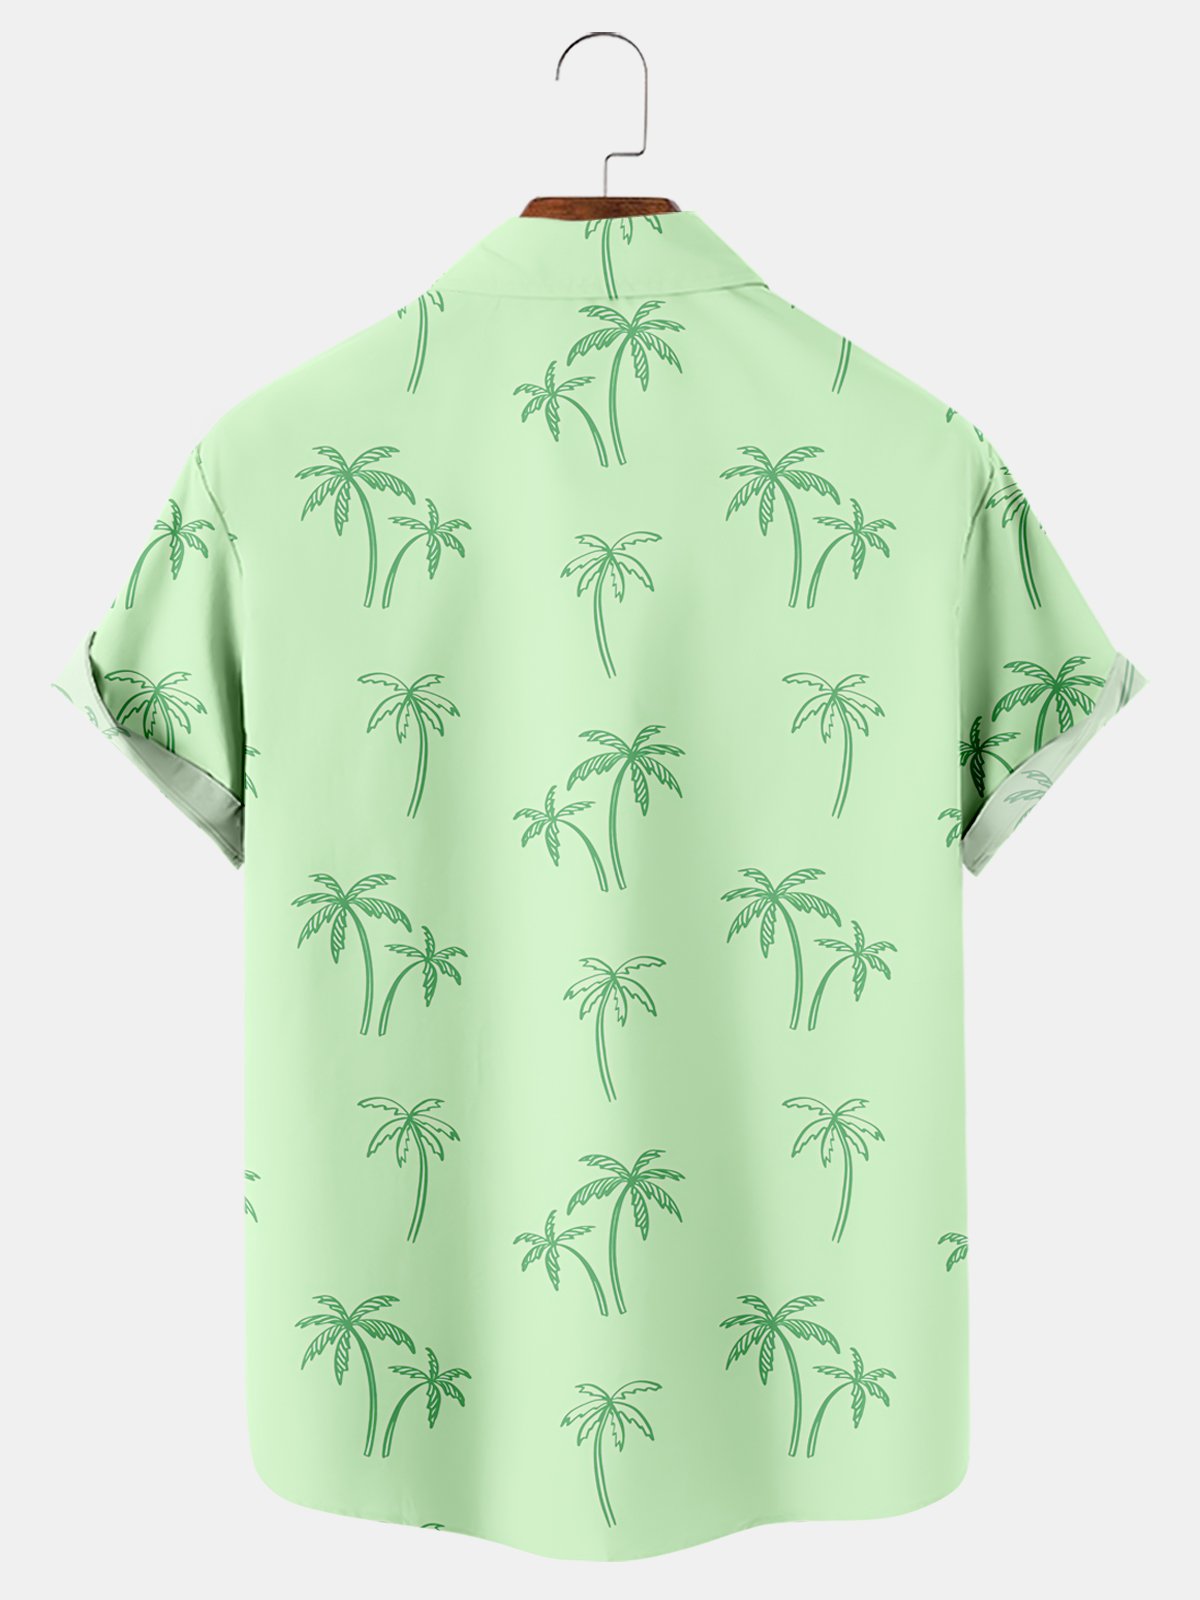 Palm Trees And Drinking Parrots Shirt